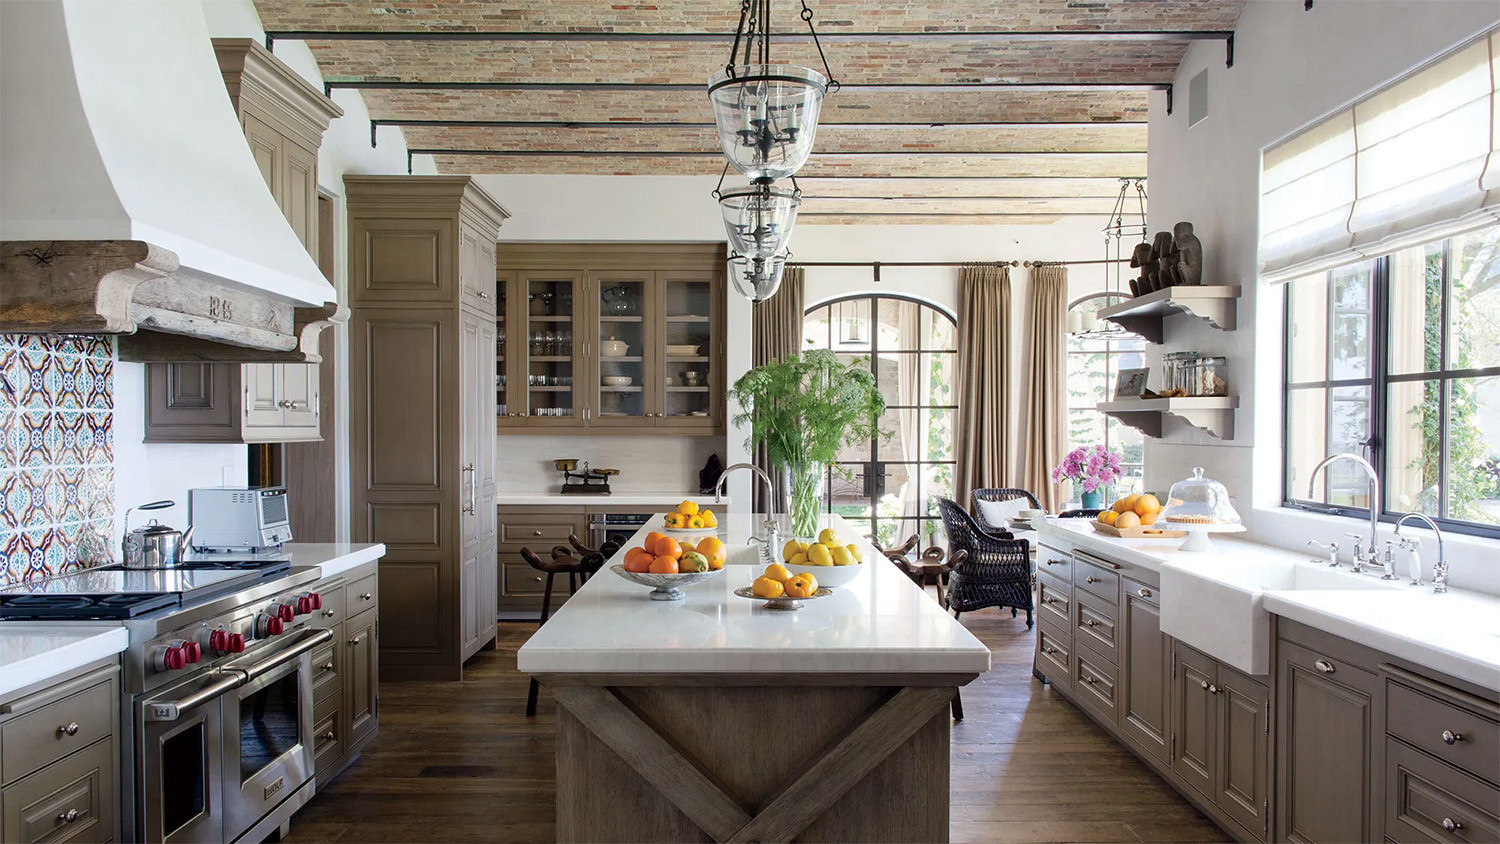 Rustic Kitchens for  Designed by Top Interior Designers